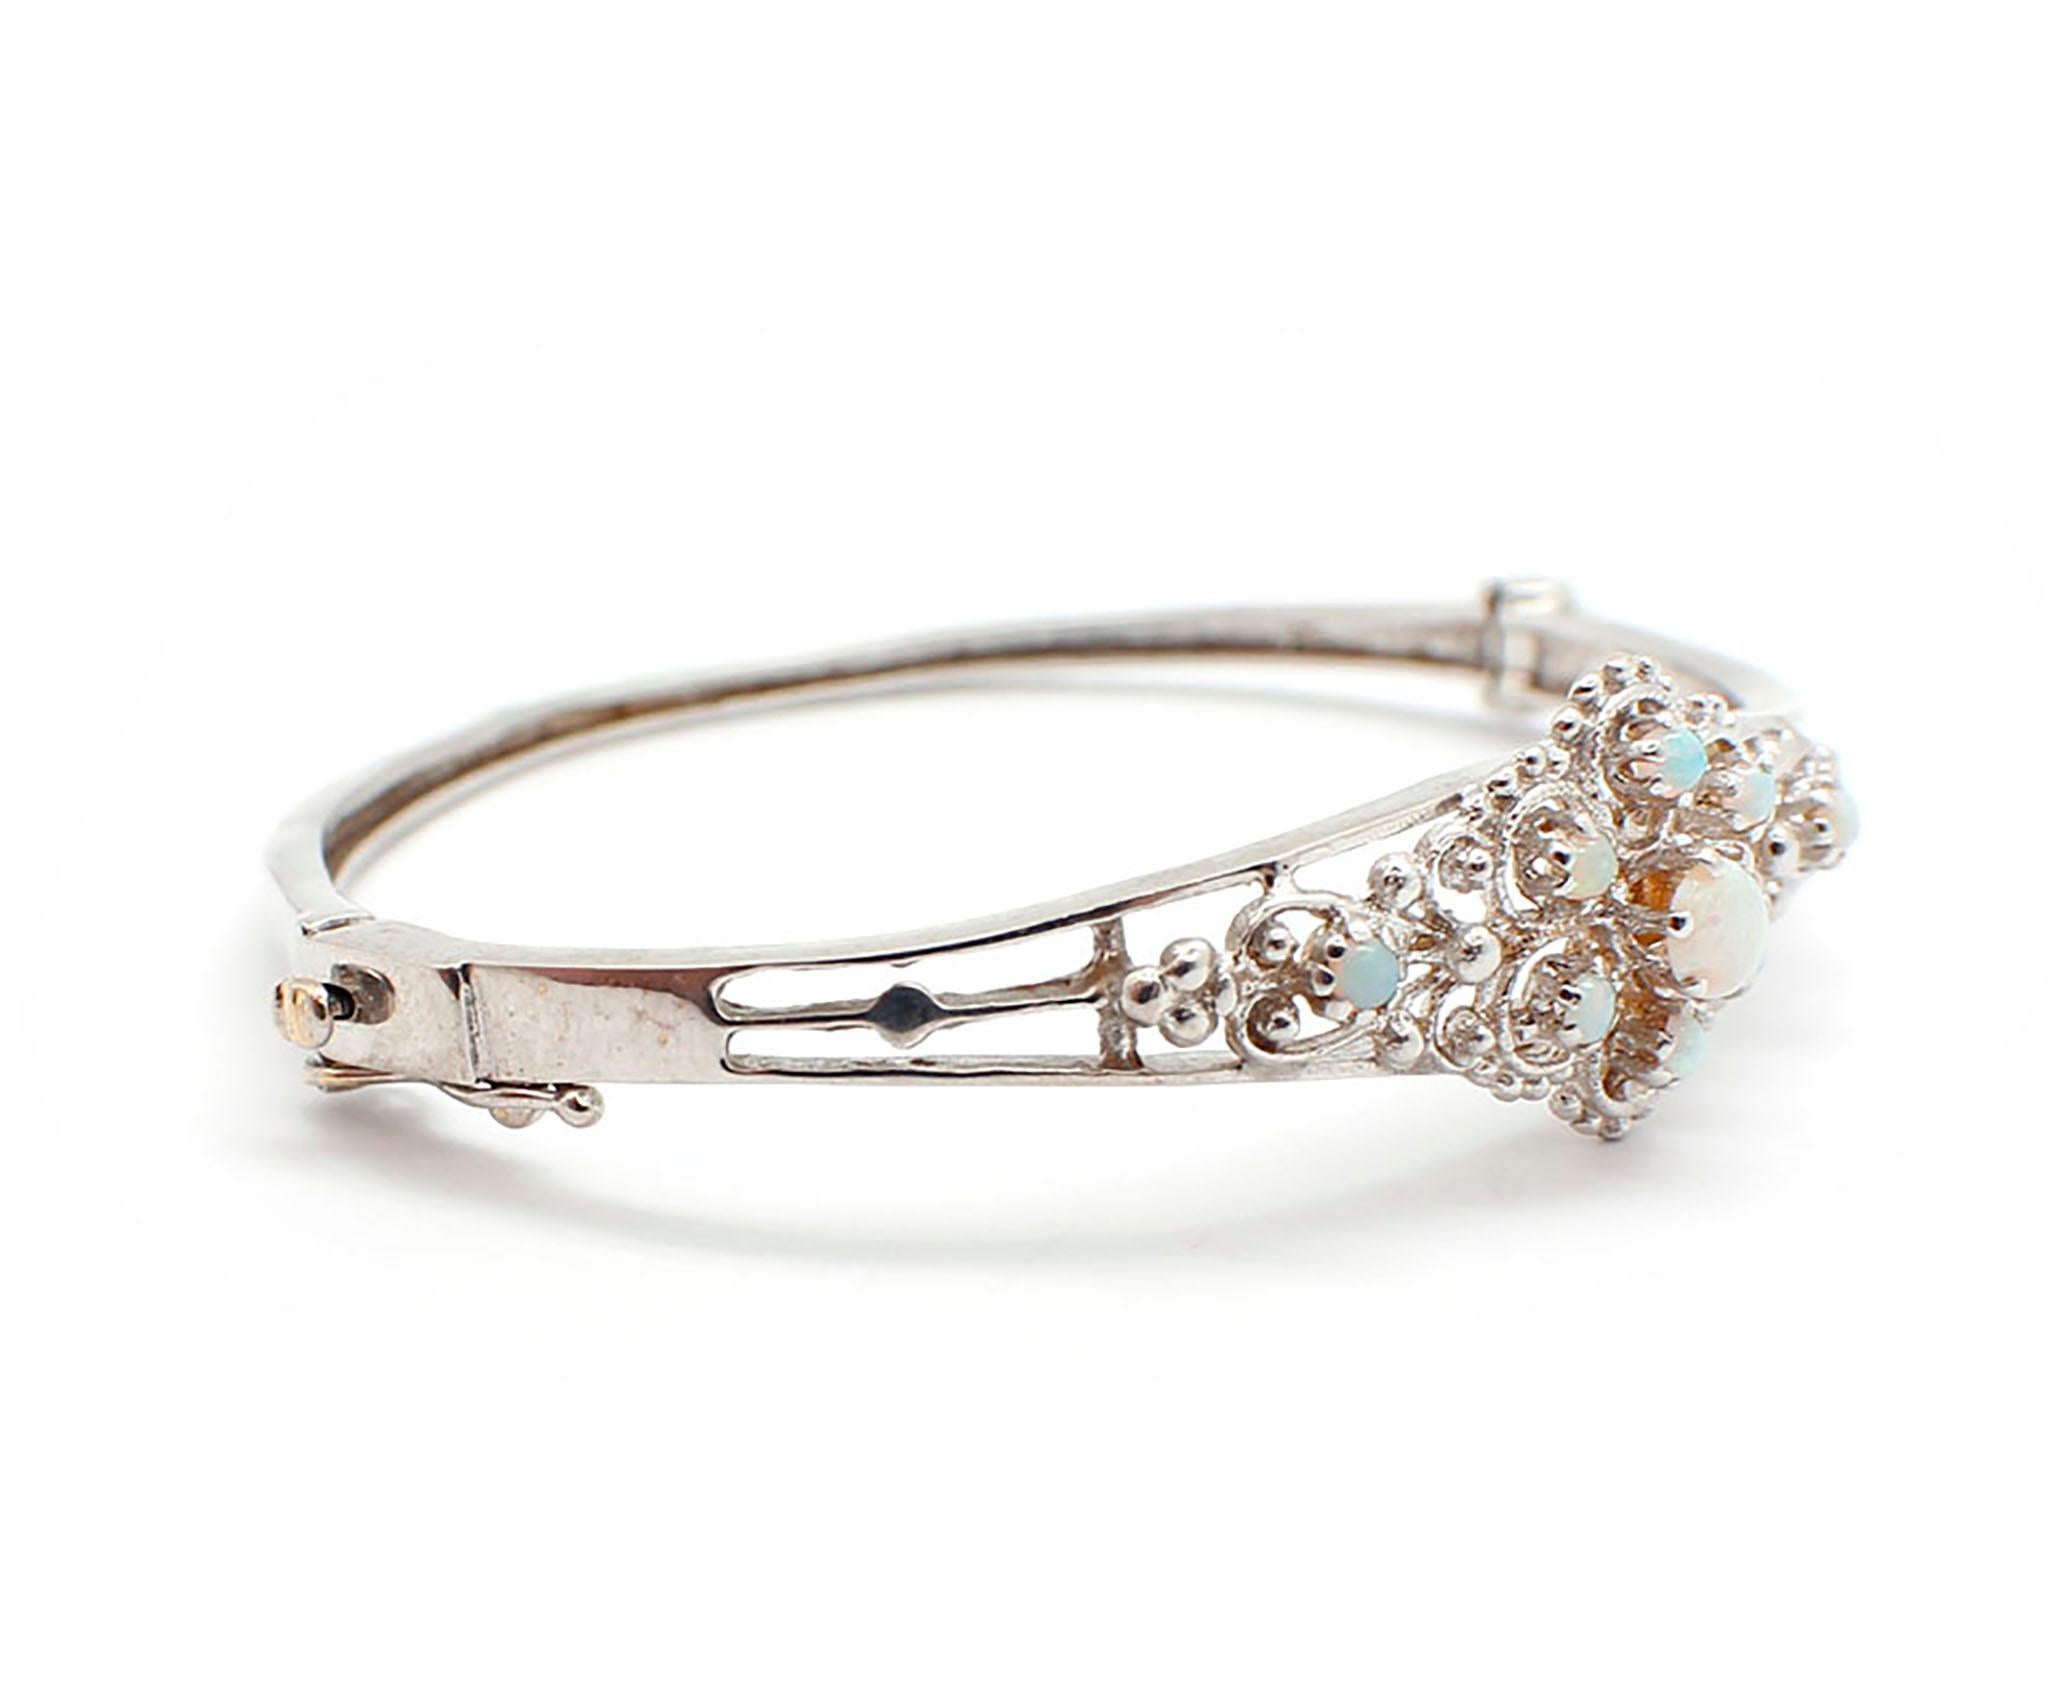 This beautiful bracelet is crafted in solid 14k white gold, and it features opals set decoratively across the face. The bracelet measures 16mm wide, and it weighs 13.22 grams. It will fit up to a 6.5-inch wrist.

